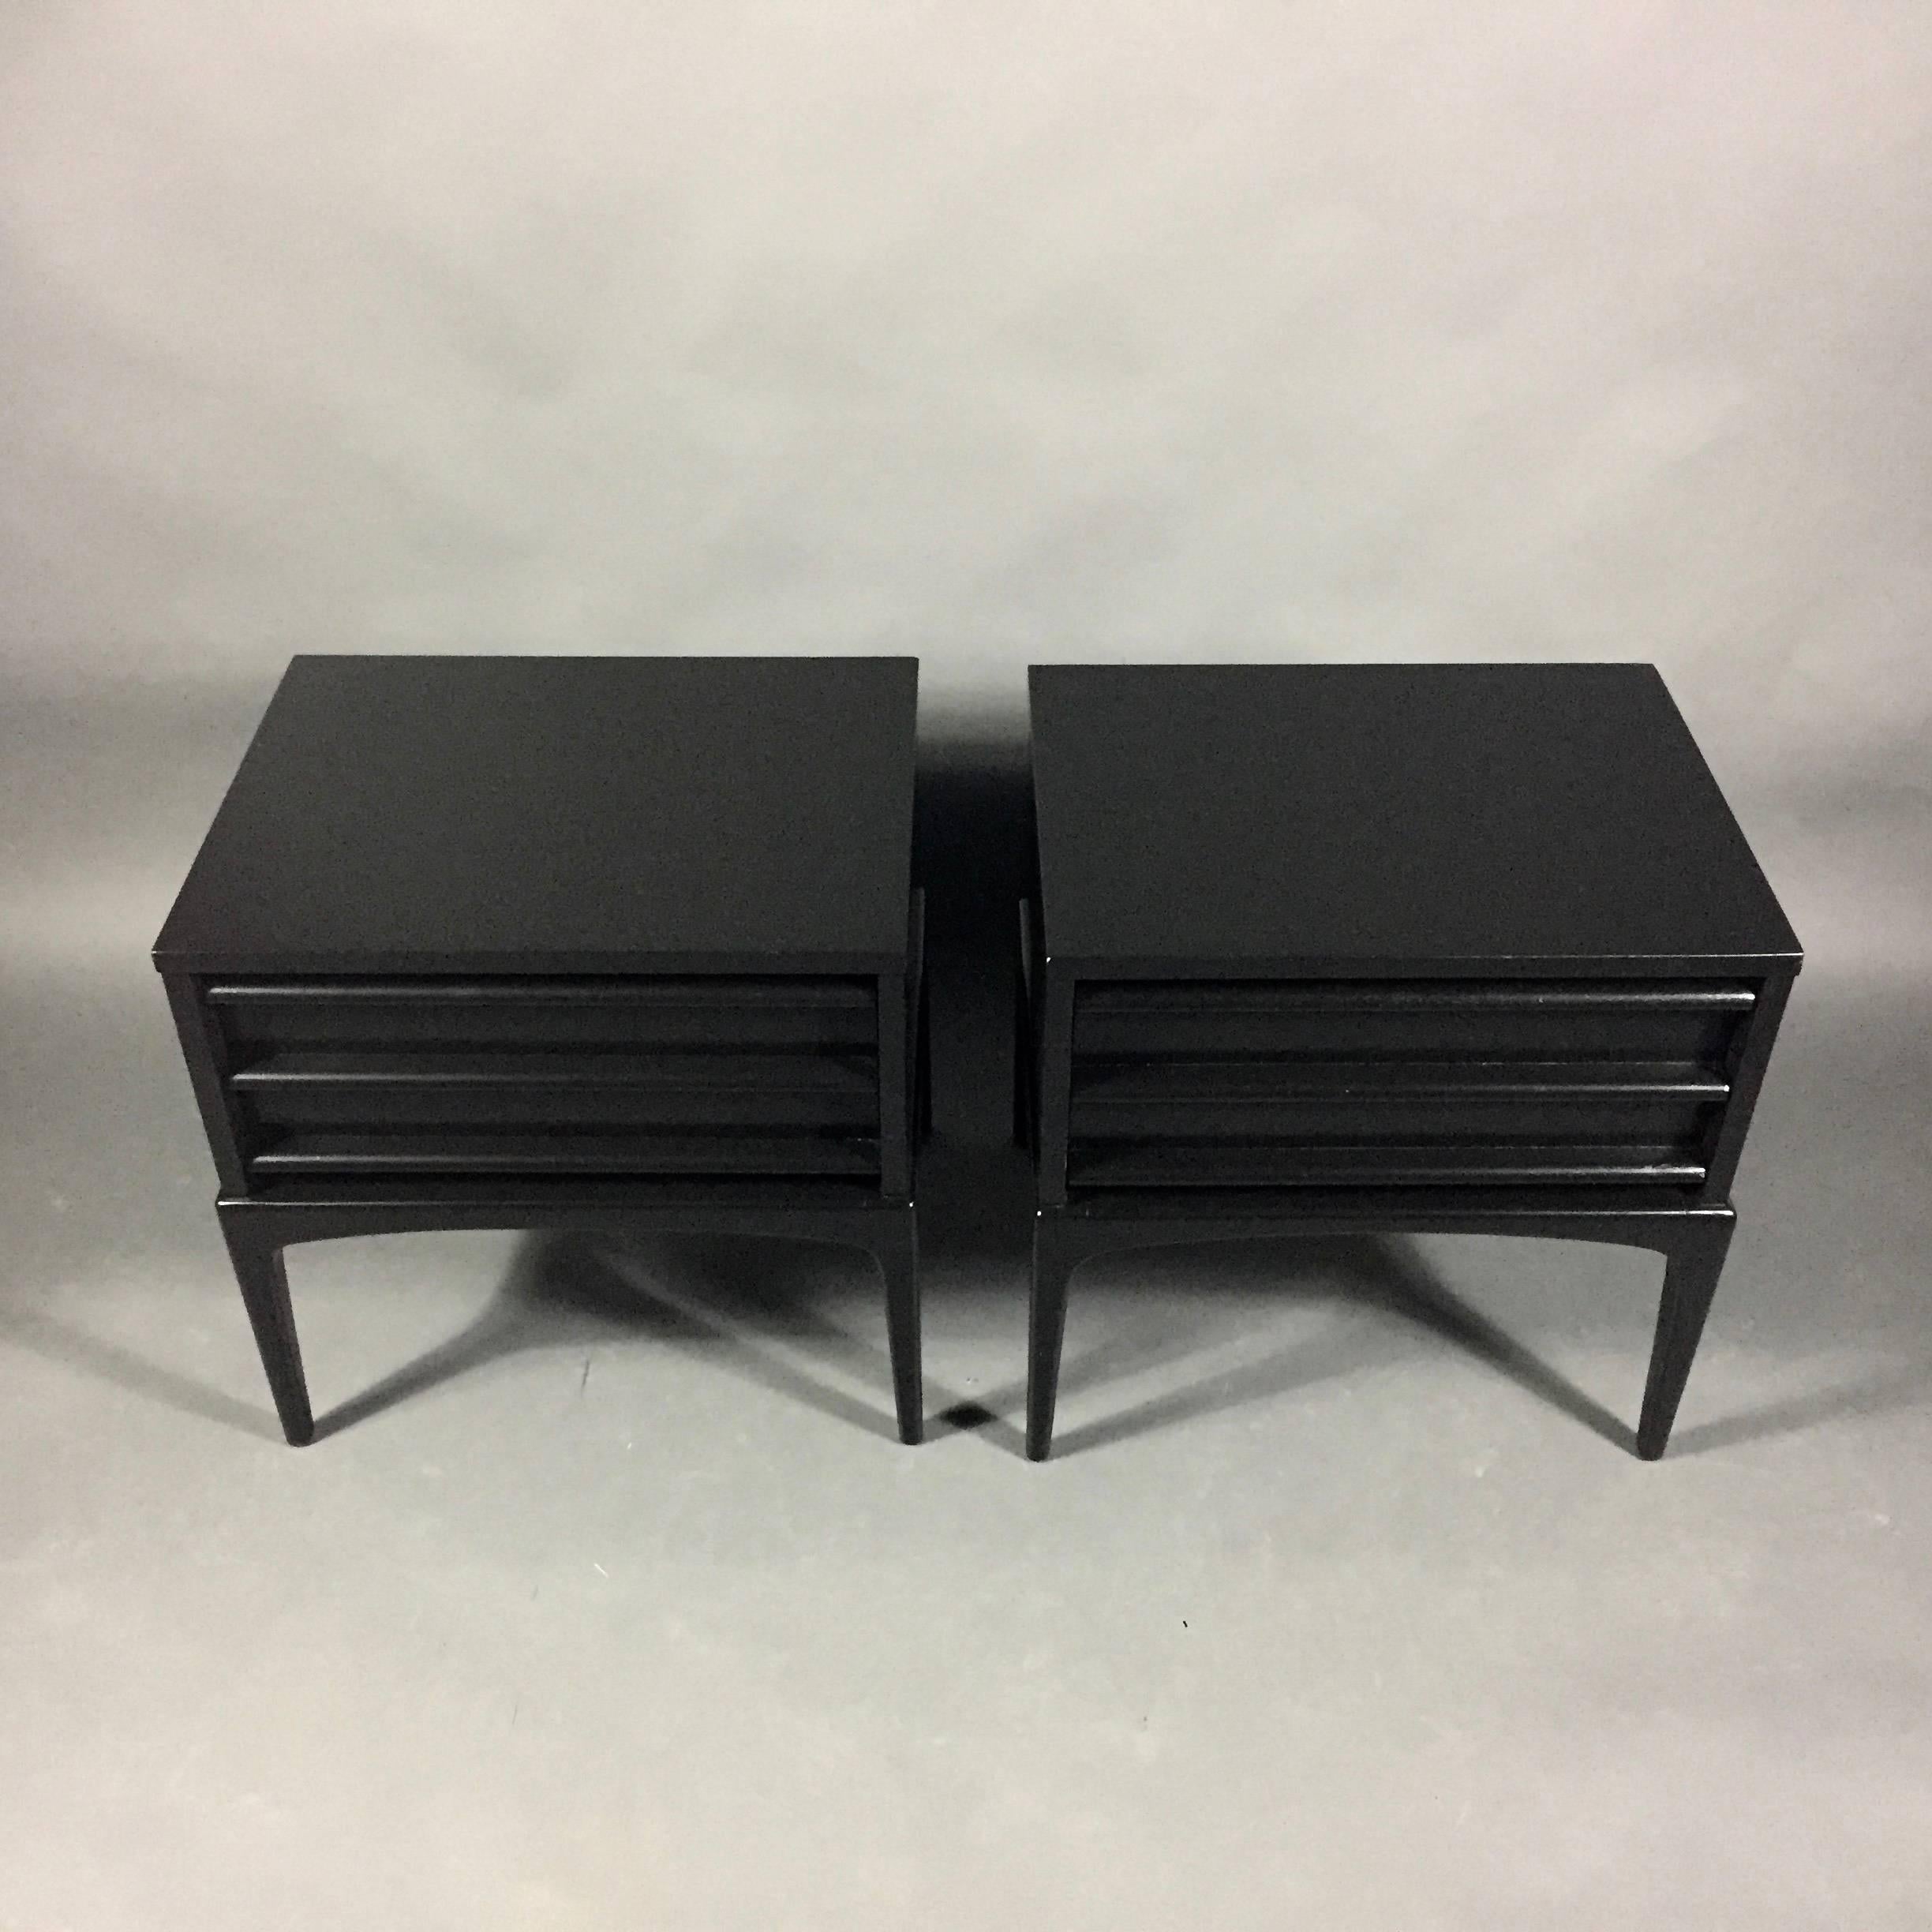 Mid-Century Modern Pair of Midcentury Black Lacquered End Tables, USA, 1960s For Sale